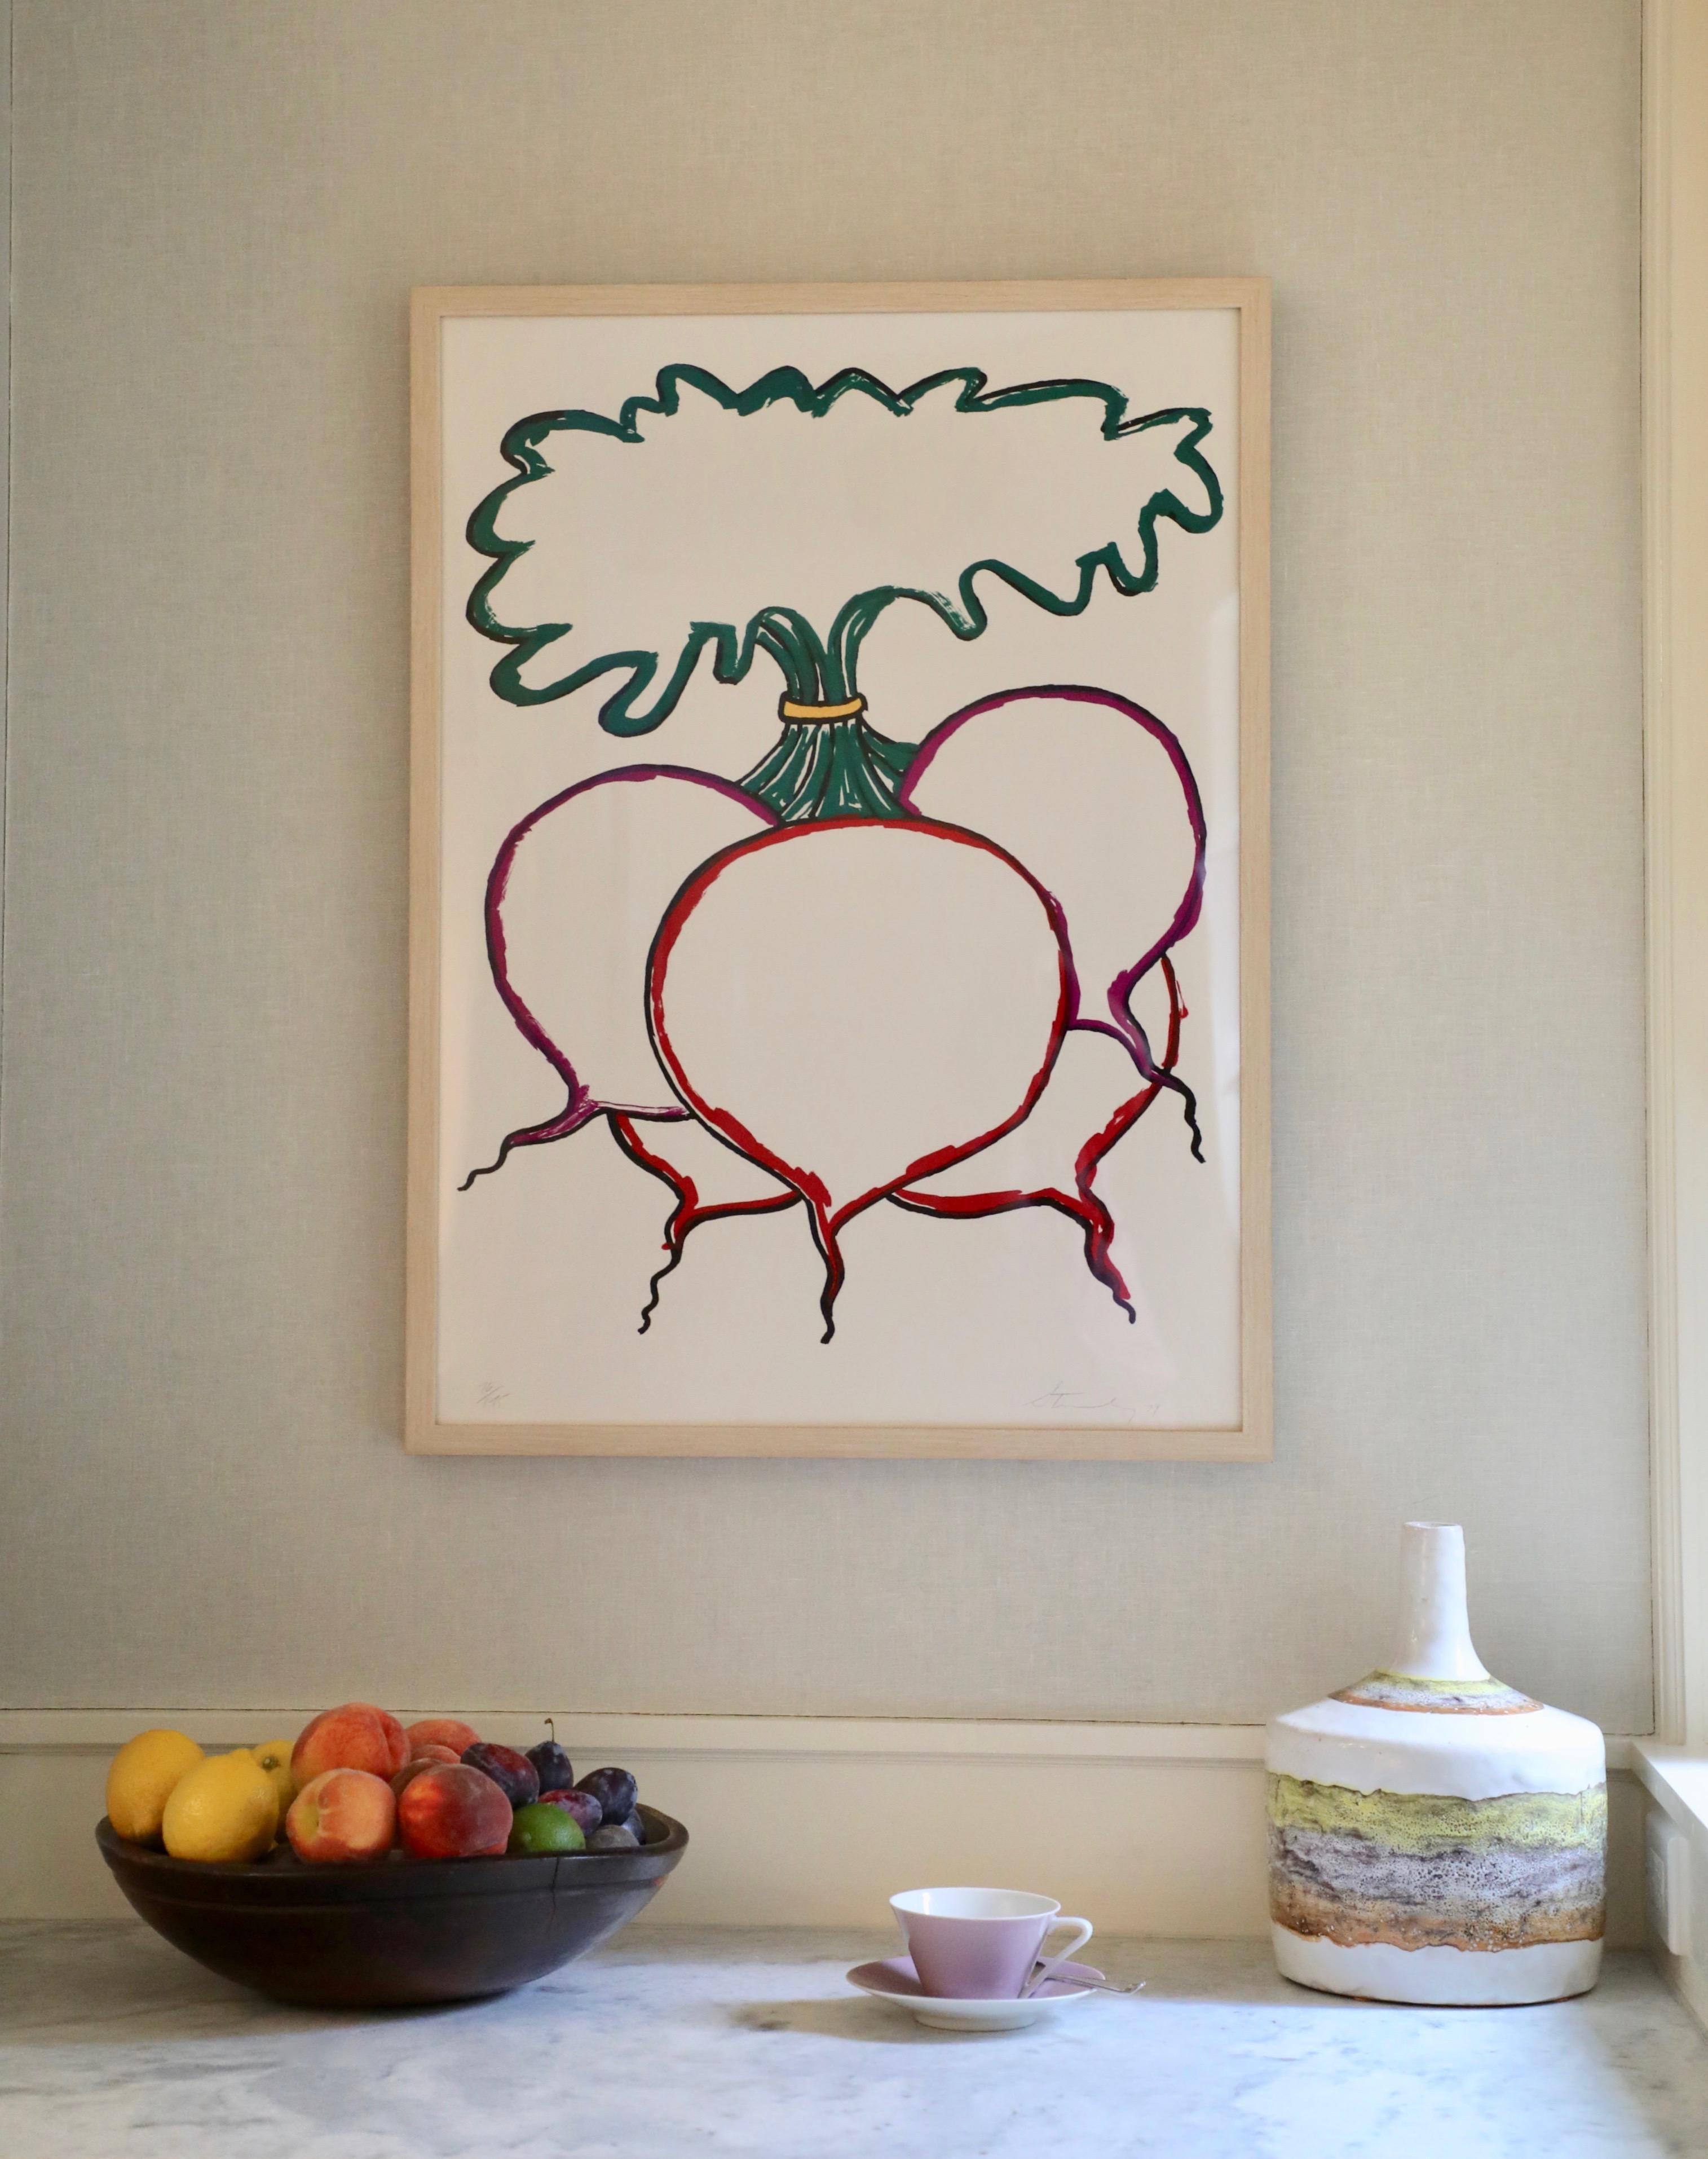 Beets Screen Print - Gray Abstract Print by Bob Stanley